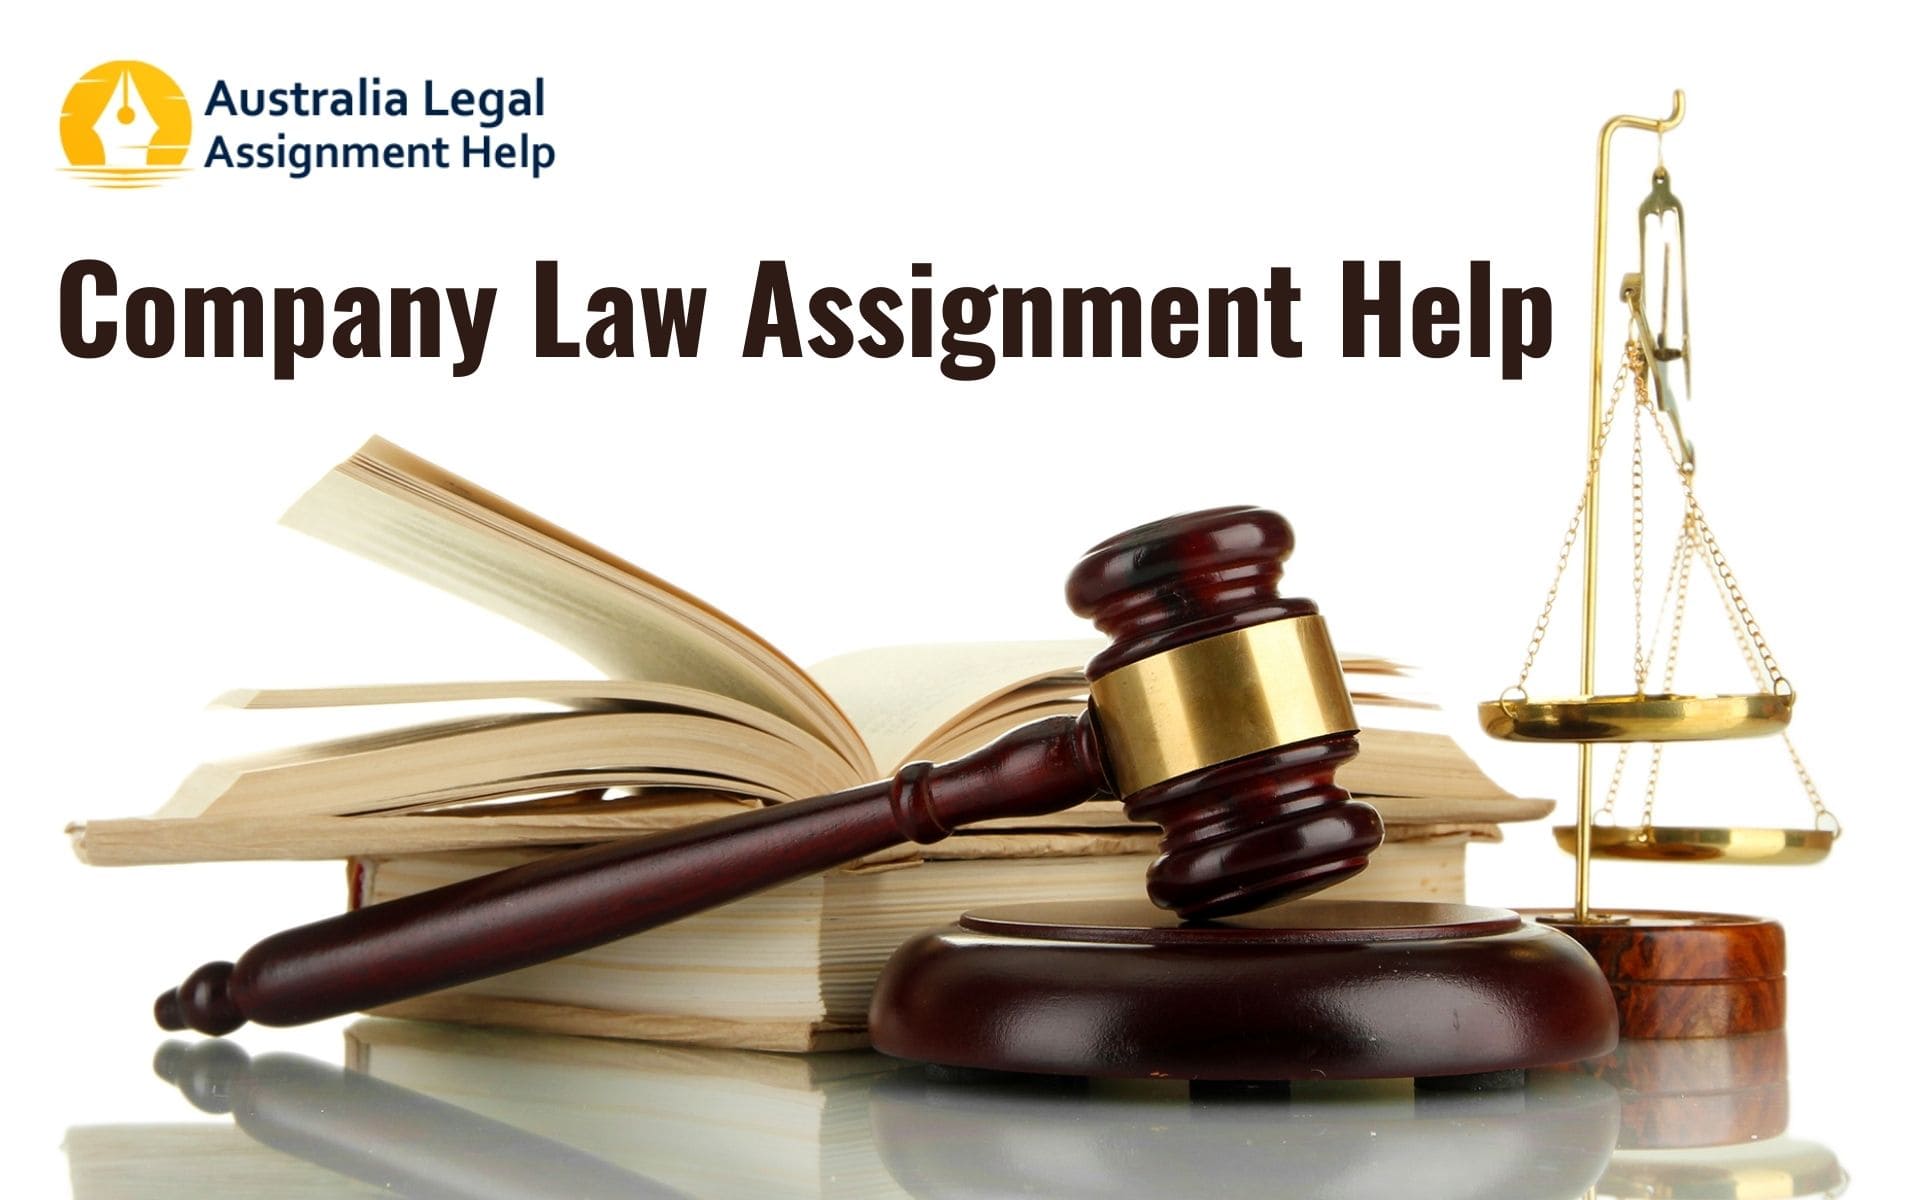 How can you score well with our Company Law Assignment Help?